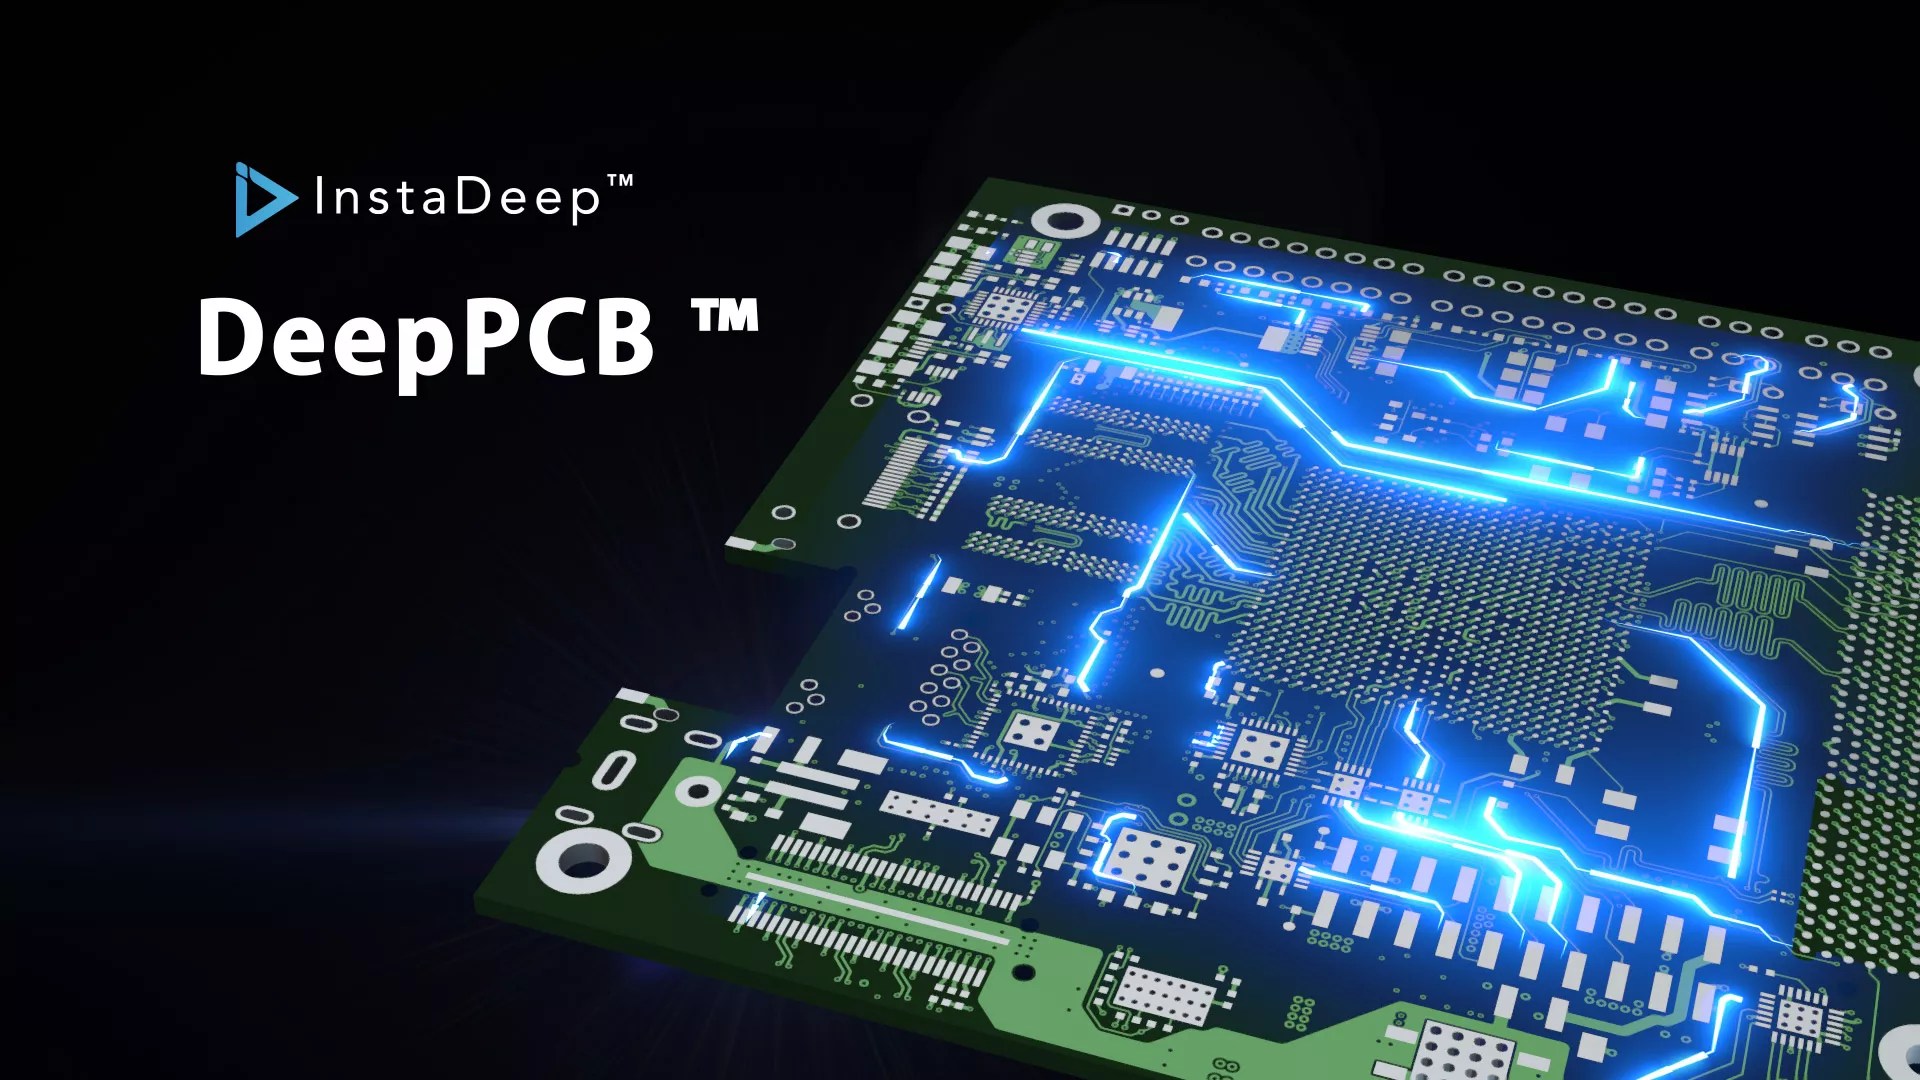 InstaDeep Launches First Pure AI-Powered Printed Circuit Board Router |  InstaDeep - Decision-Making AI For The Enterprise